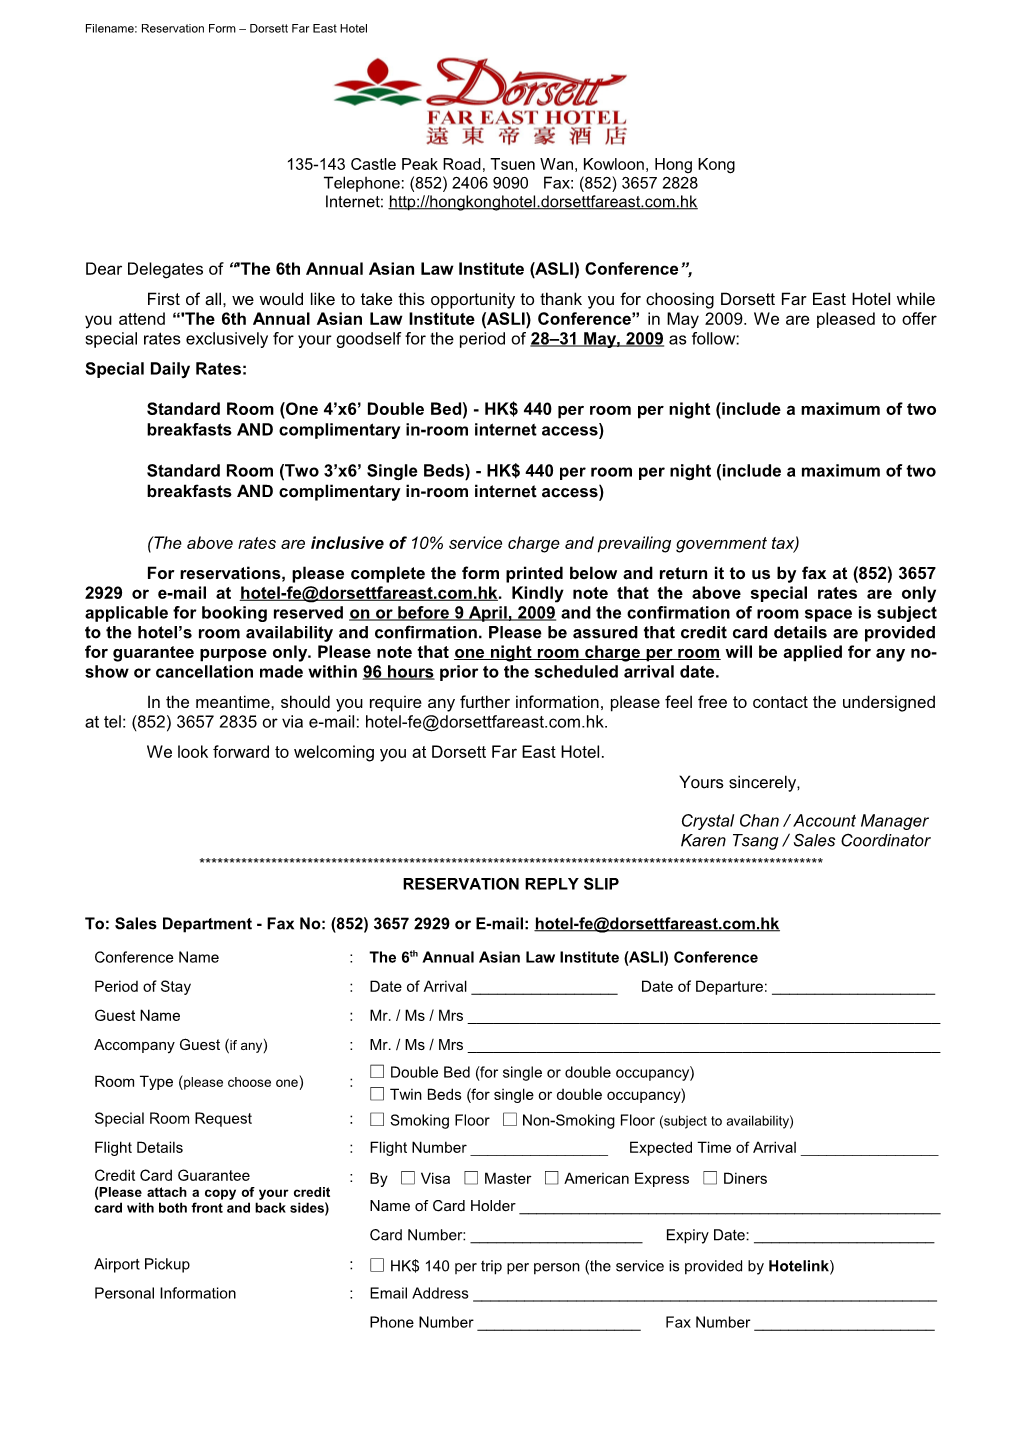 Reservation Form for 'The 6Th Annual Asian Law Institute ASLI Conference' - 28 - 31 May 2009